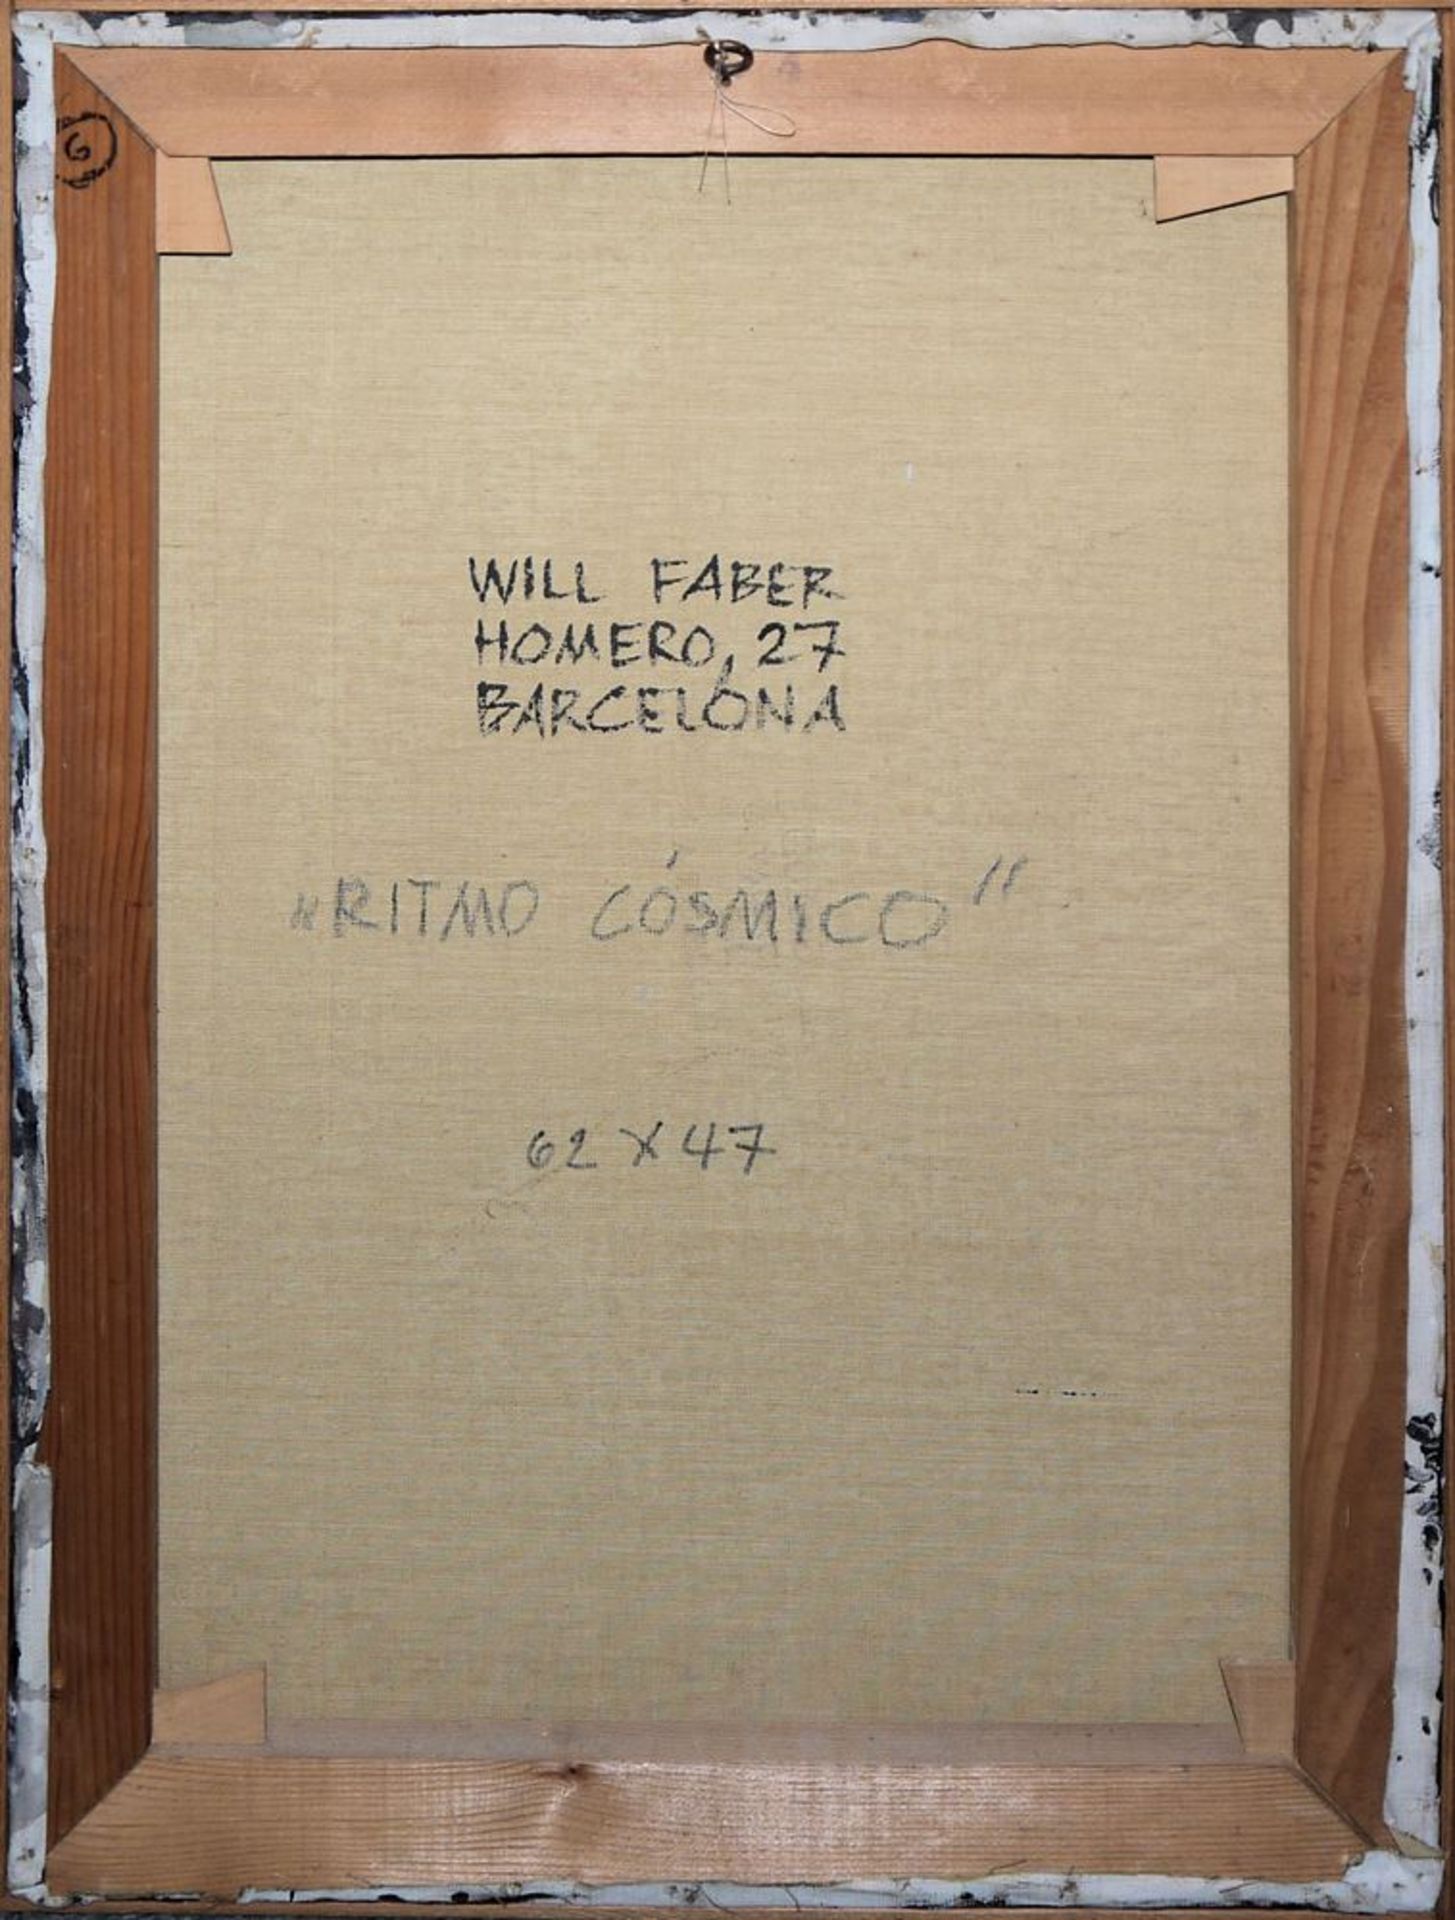 Will Faber, "Ritmo Cósmico", signed mixed media from 1958, framed - Image 3 of 3